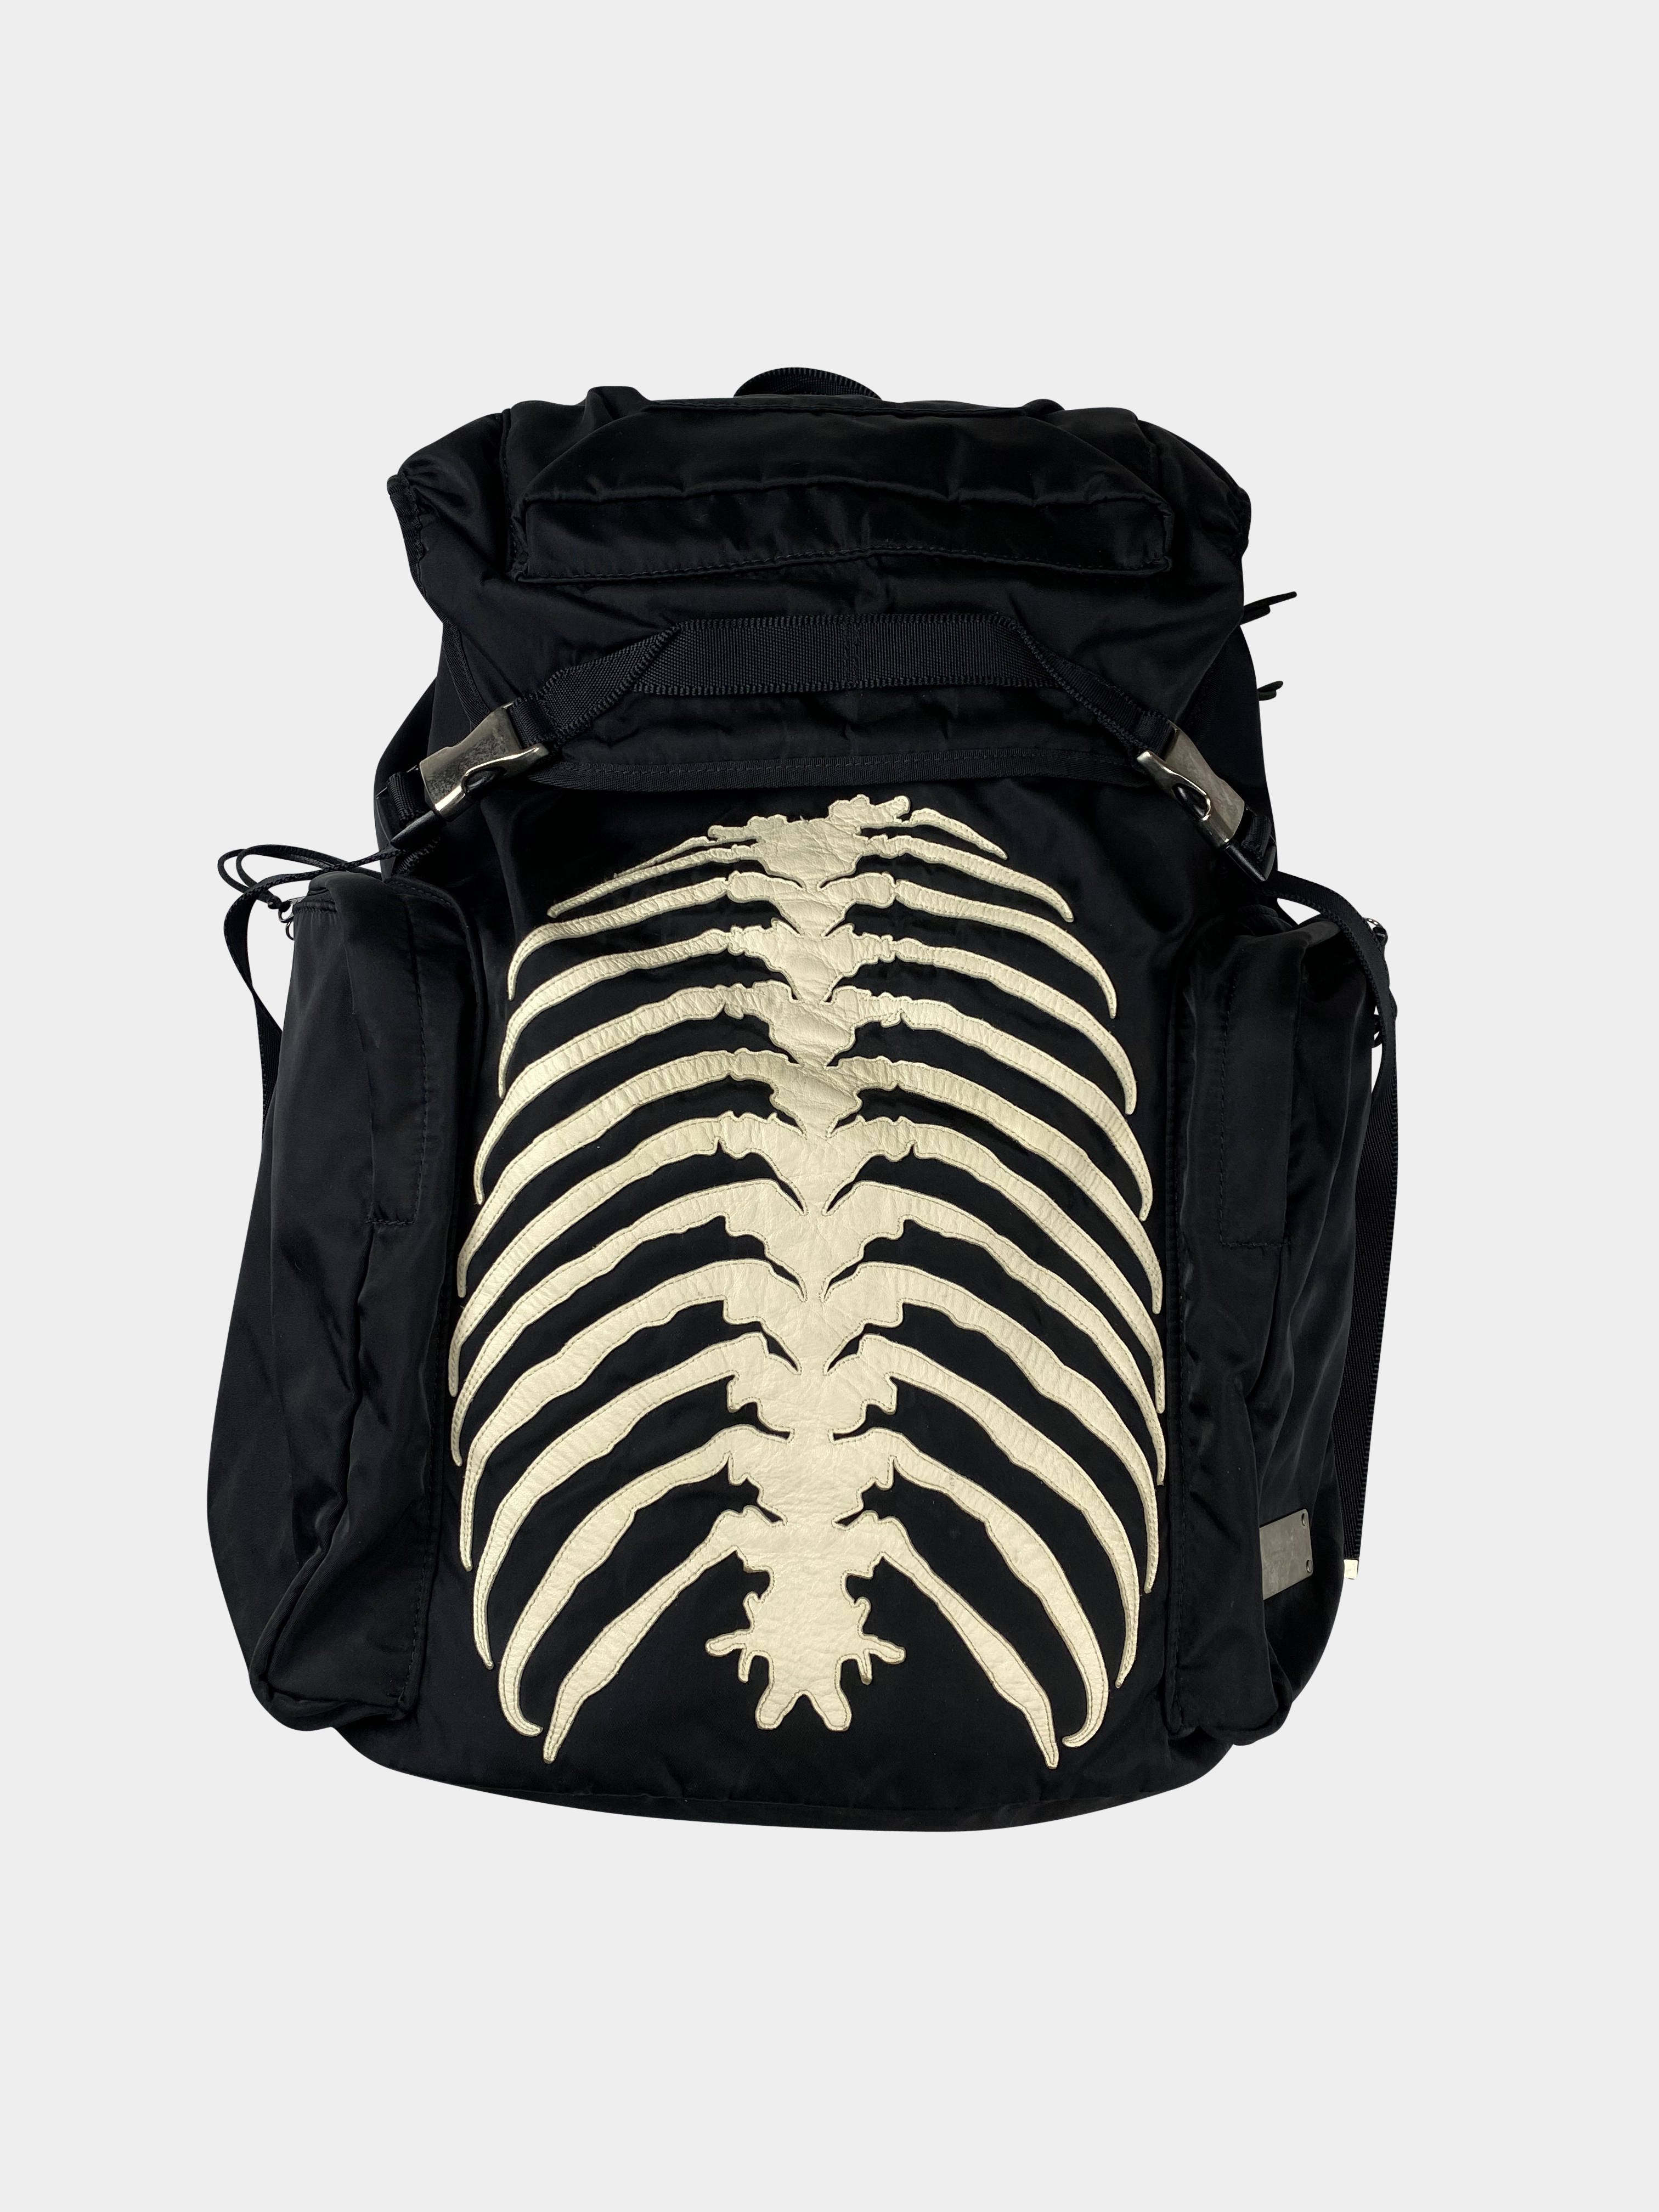 UNDERCOVER Ribcage Backpack - ARCHIVED